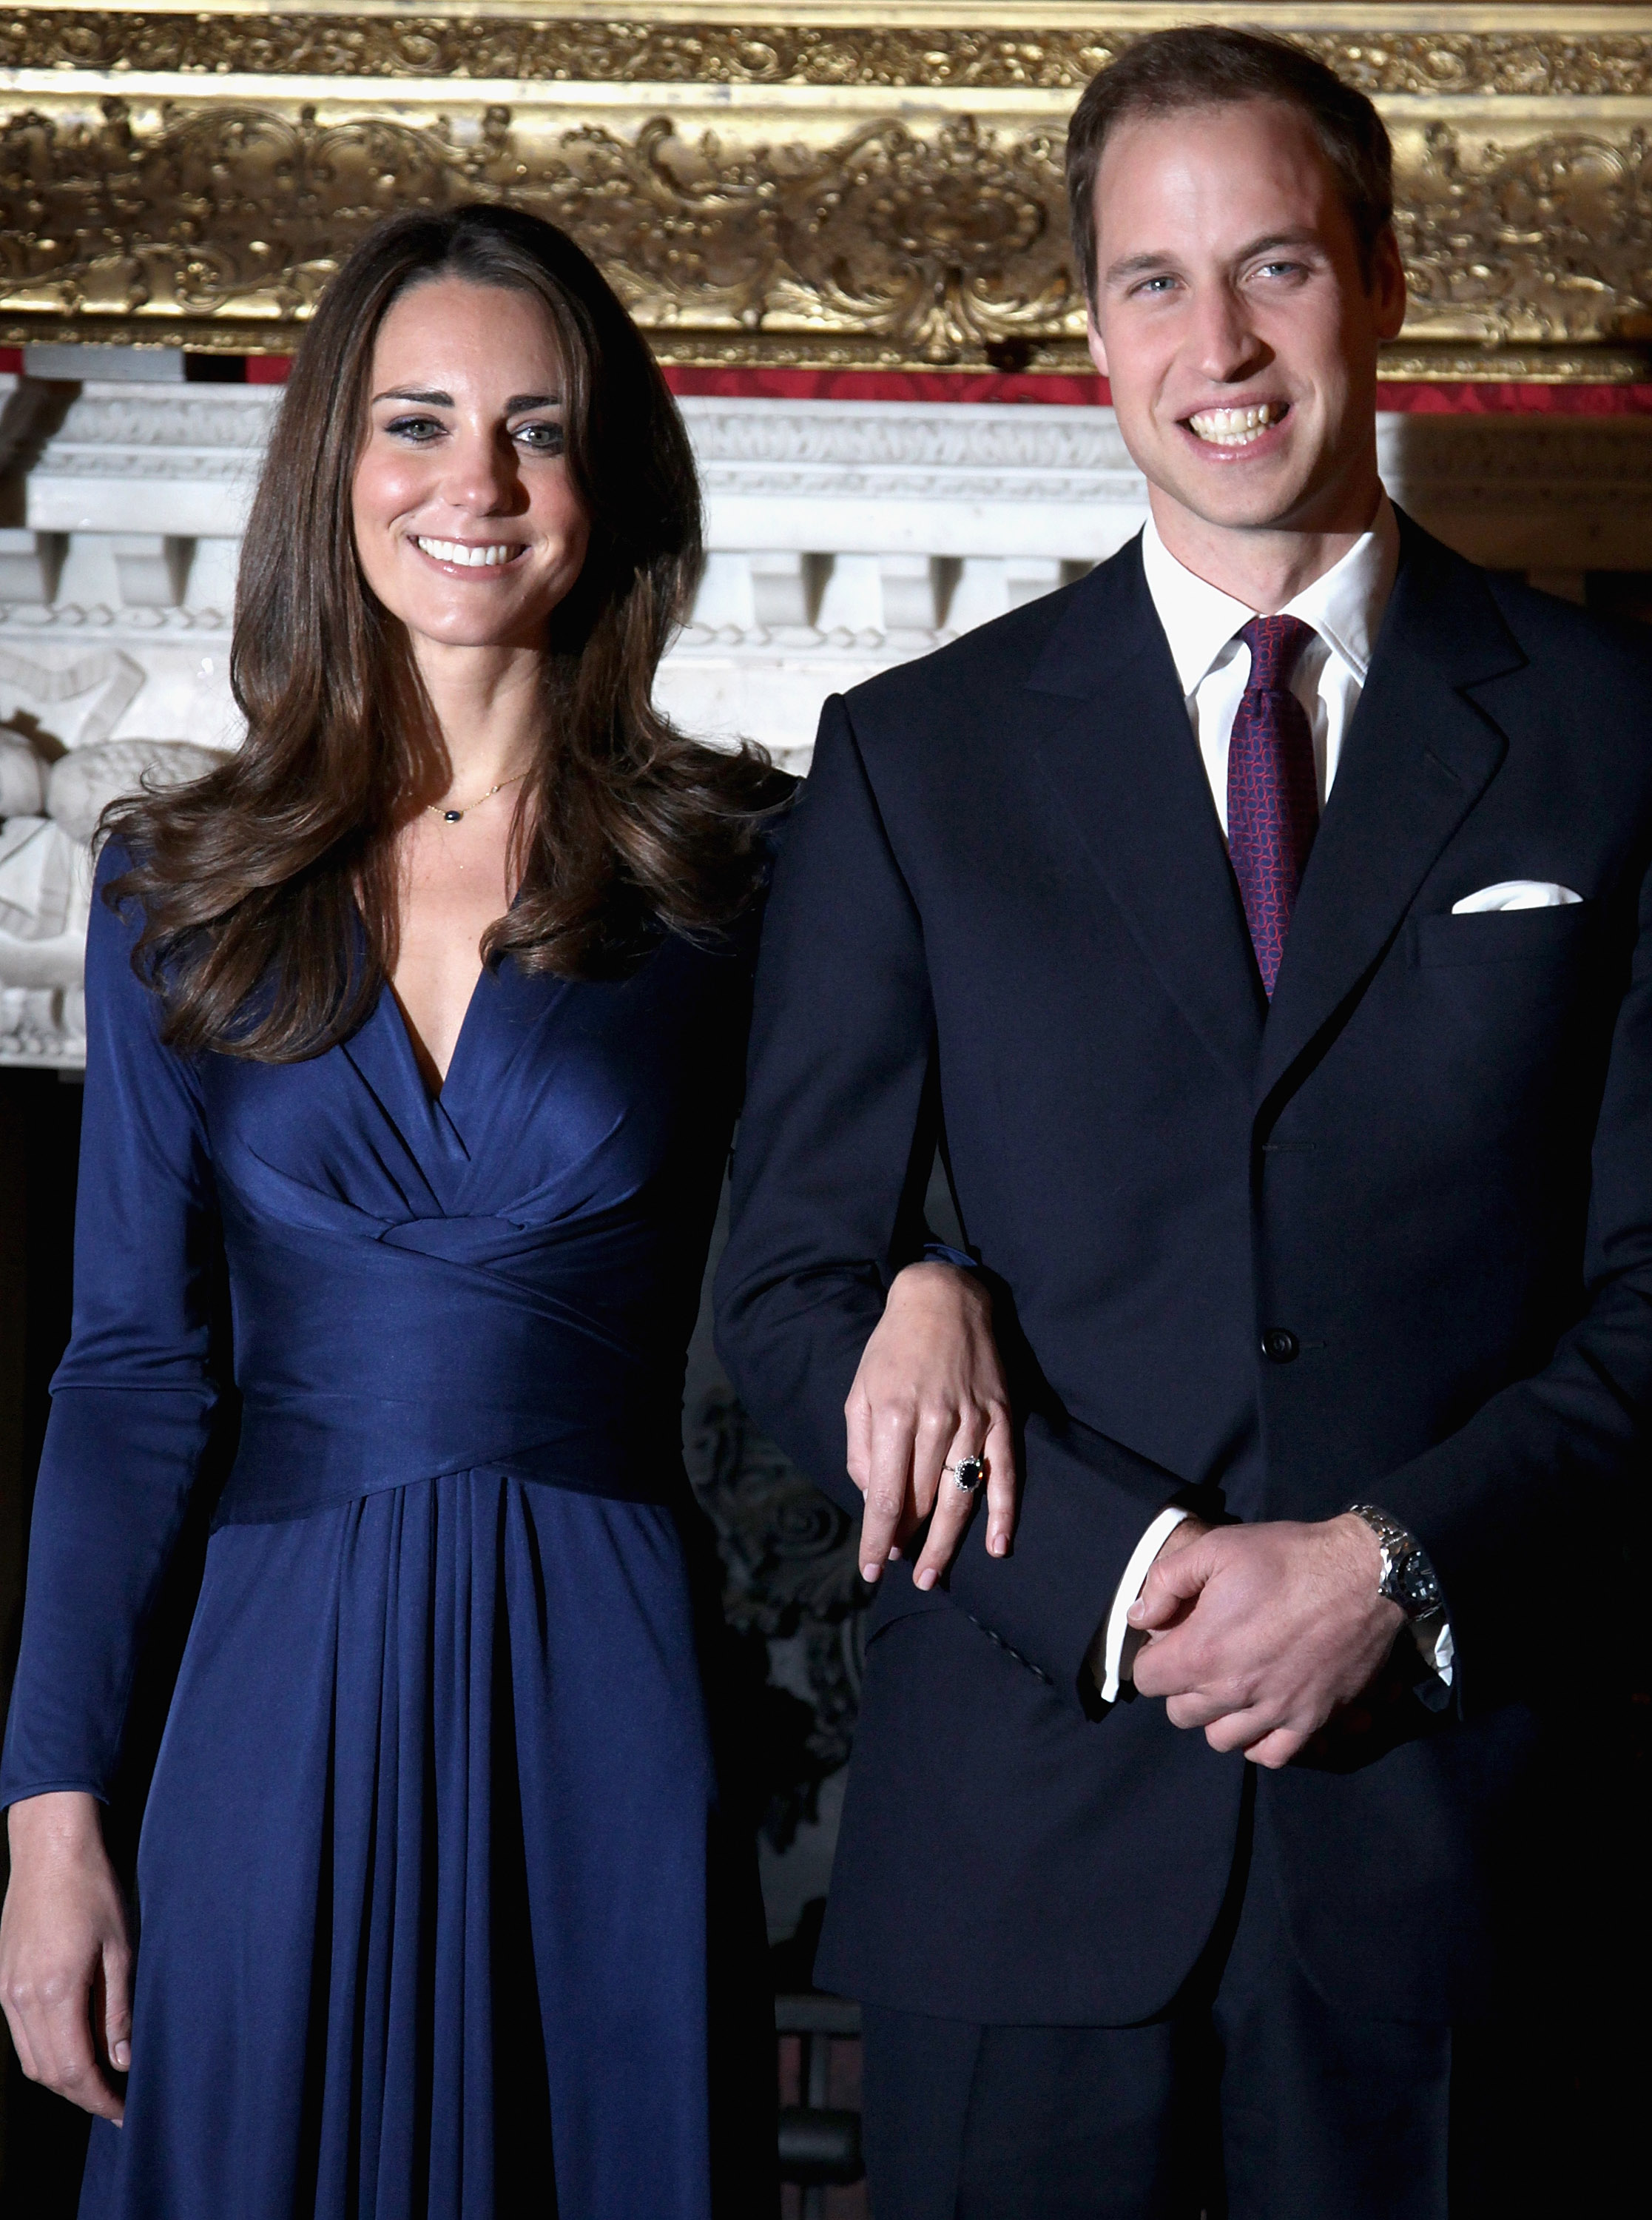 Prince+william+and+kate+middleton+engagement+pictures